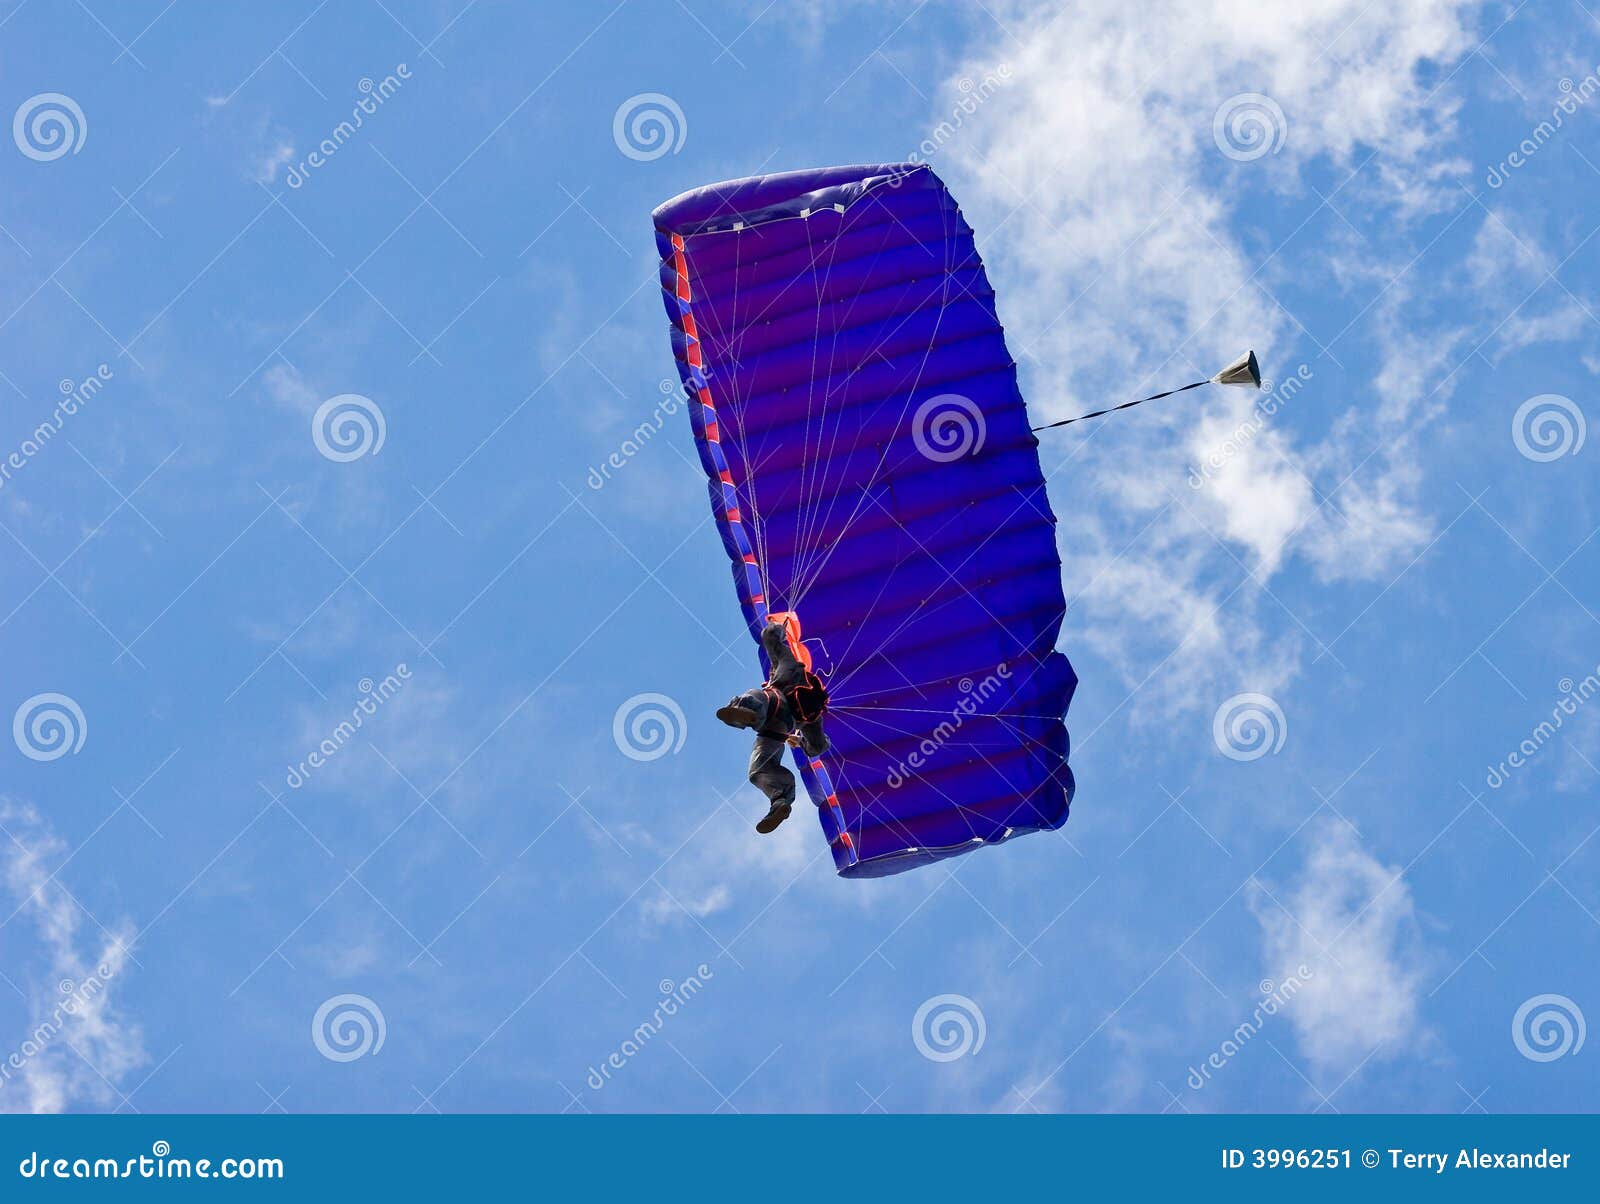 Skydiver With Parachute Stock Image Image Of Height Parachute 3996251